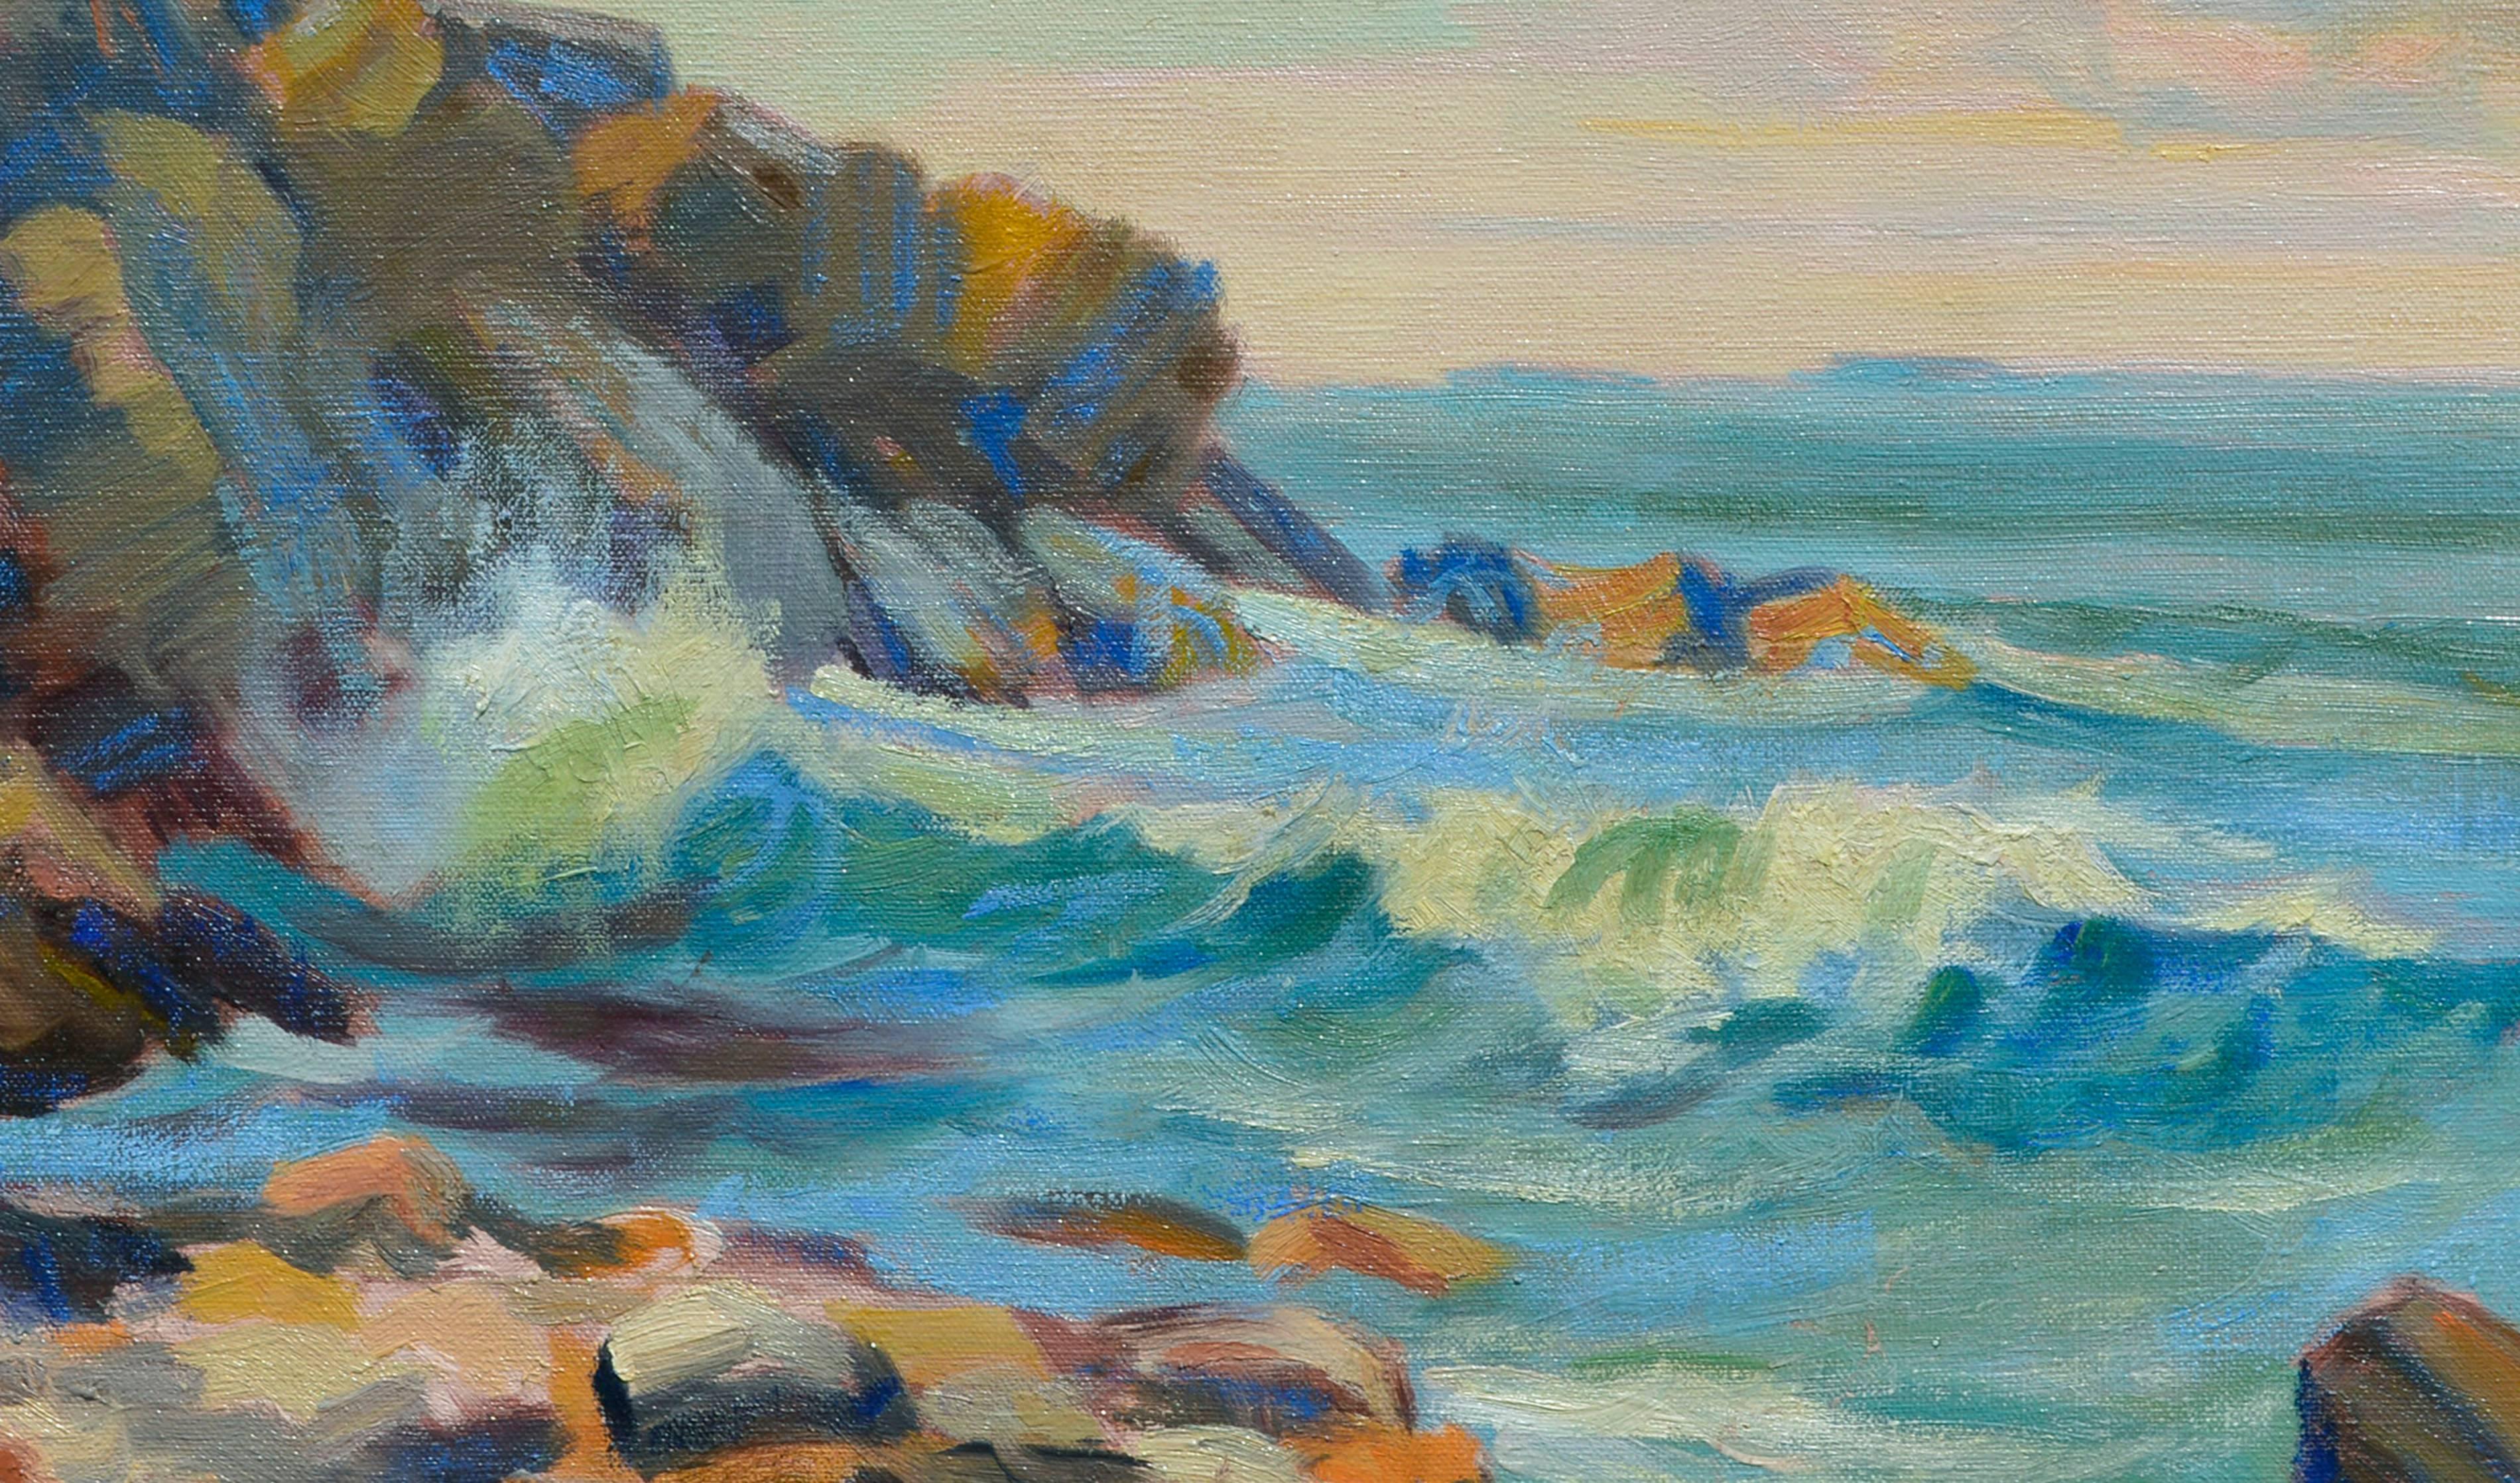 Rugged California Coast  - 1930's Seascape  - Painting by Charles Morris